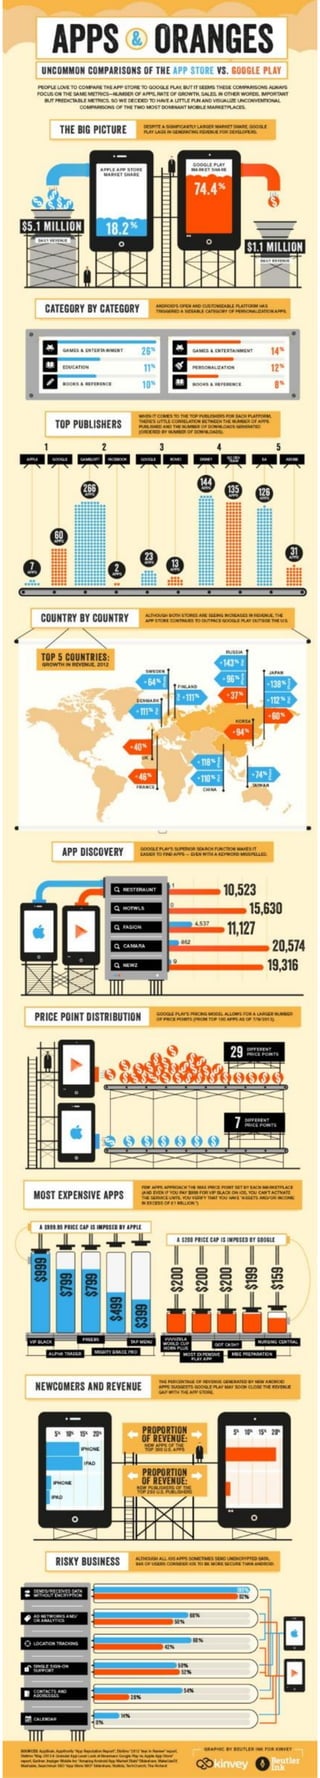 AppStore and Google Play Comparison (Apps & Oranges)